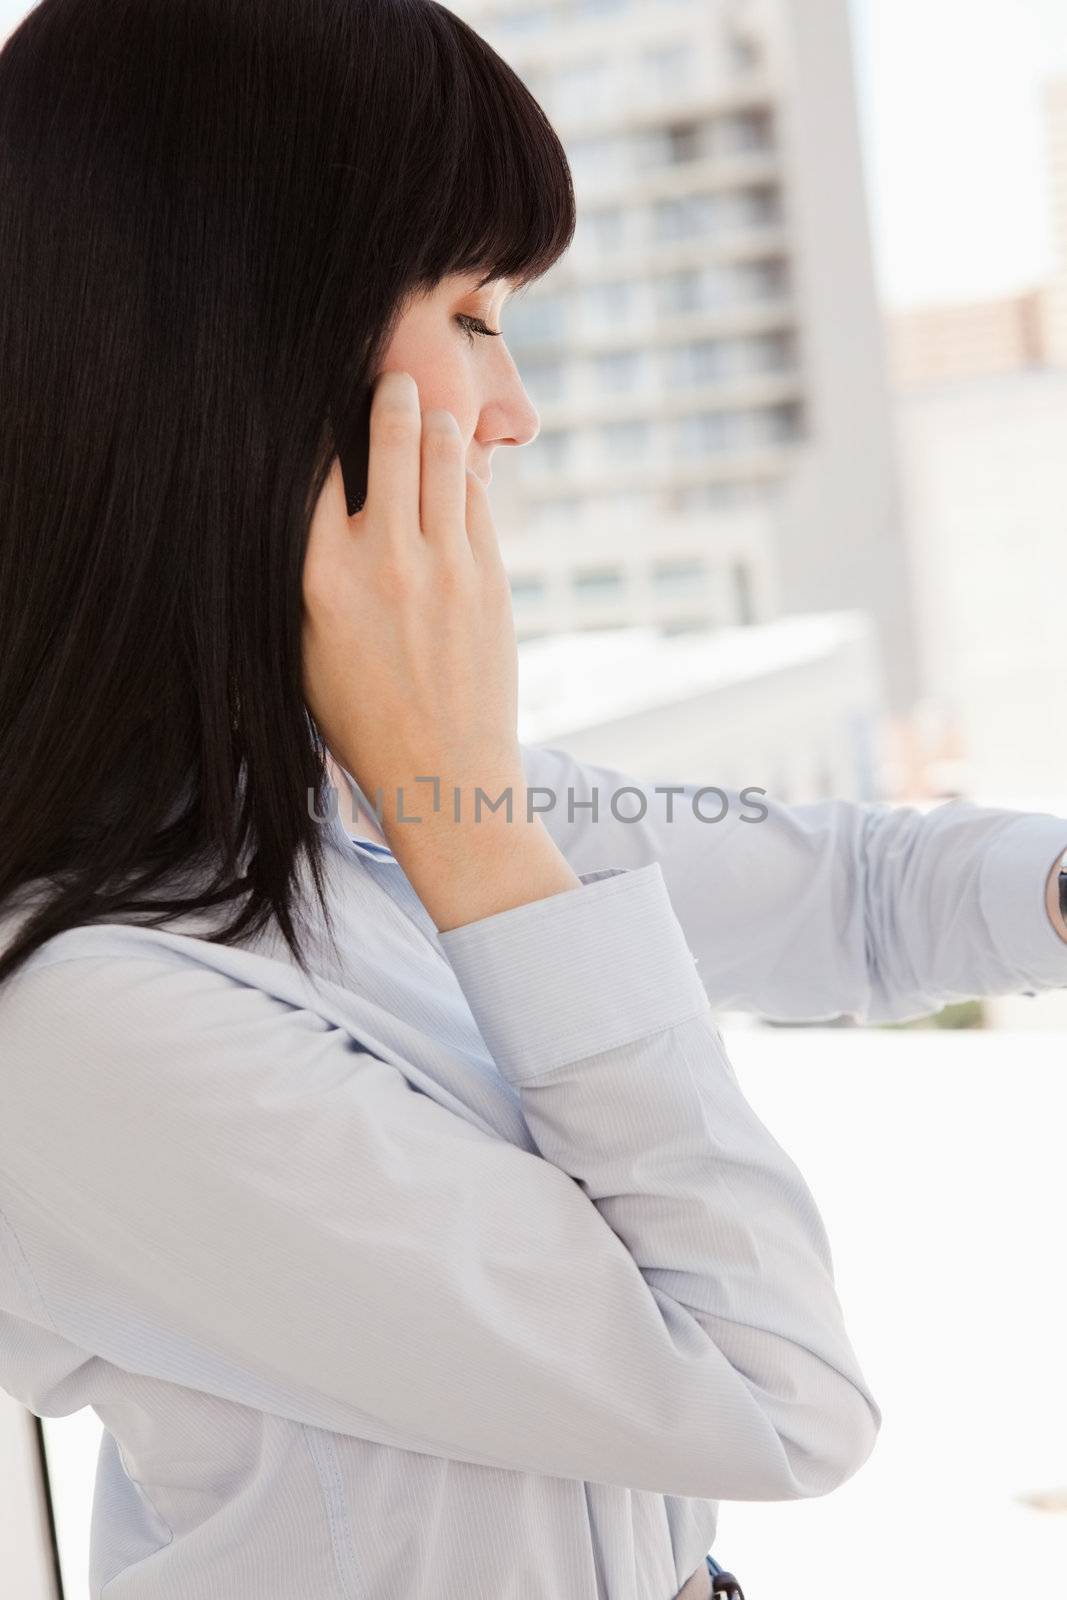 A woman making a call while she looks at her watch